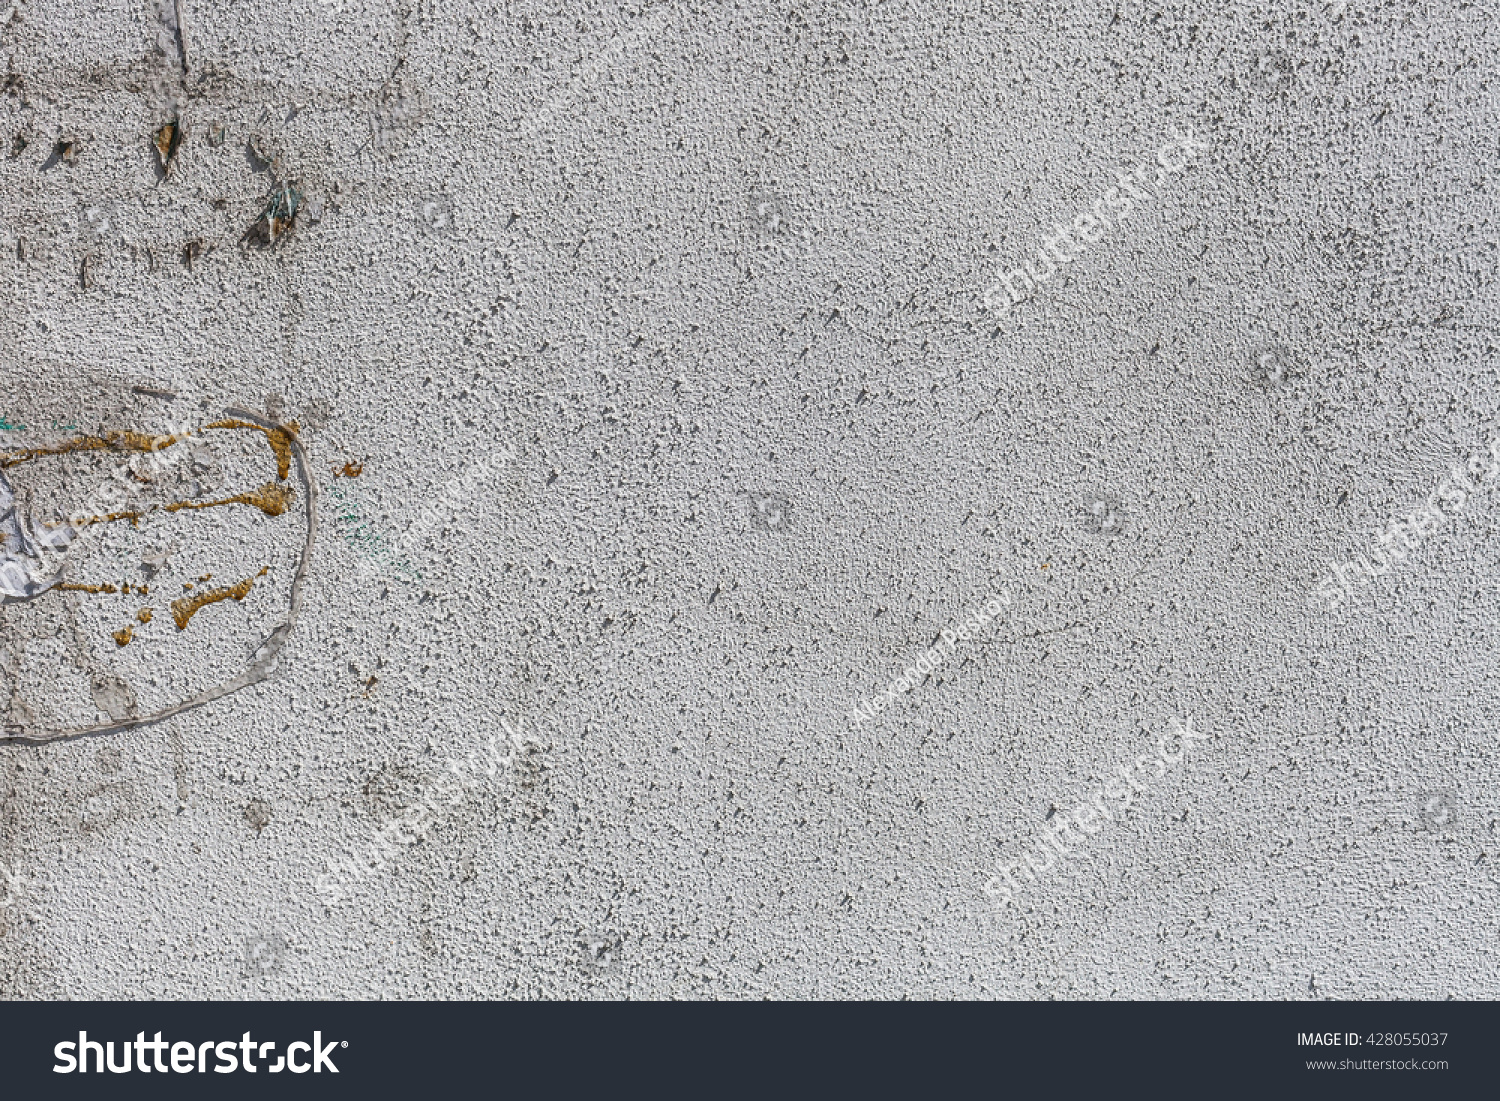 Rough Texture White Painted Wall Dirt Stock Photo Edit Now 428055037